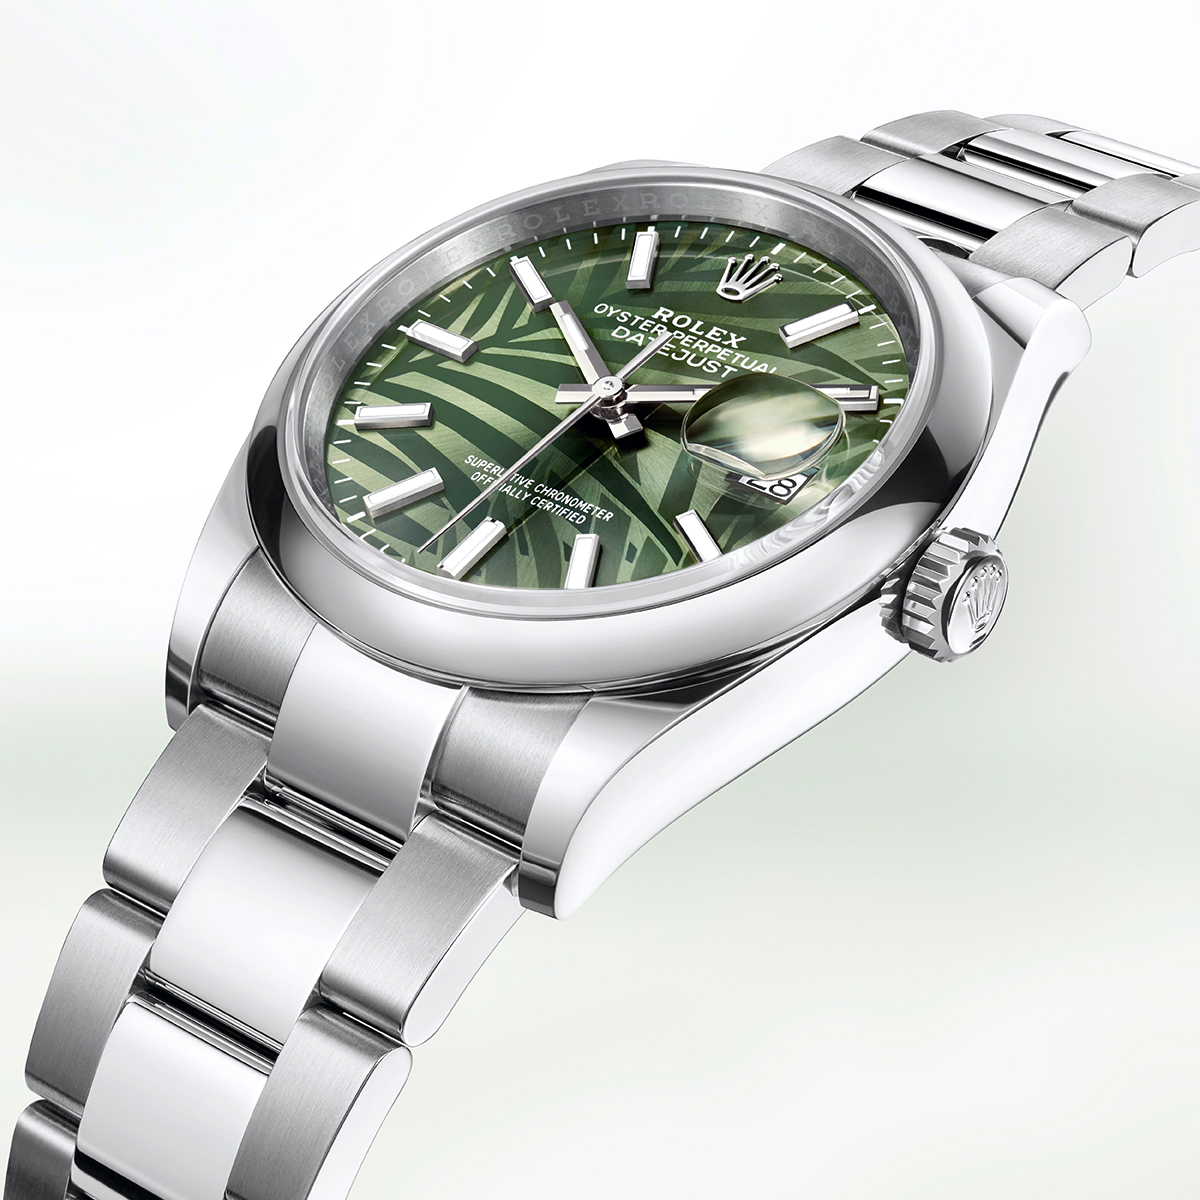 2021 Rolex Oyster Perpetual Datejust 36 - oystersteel